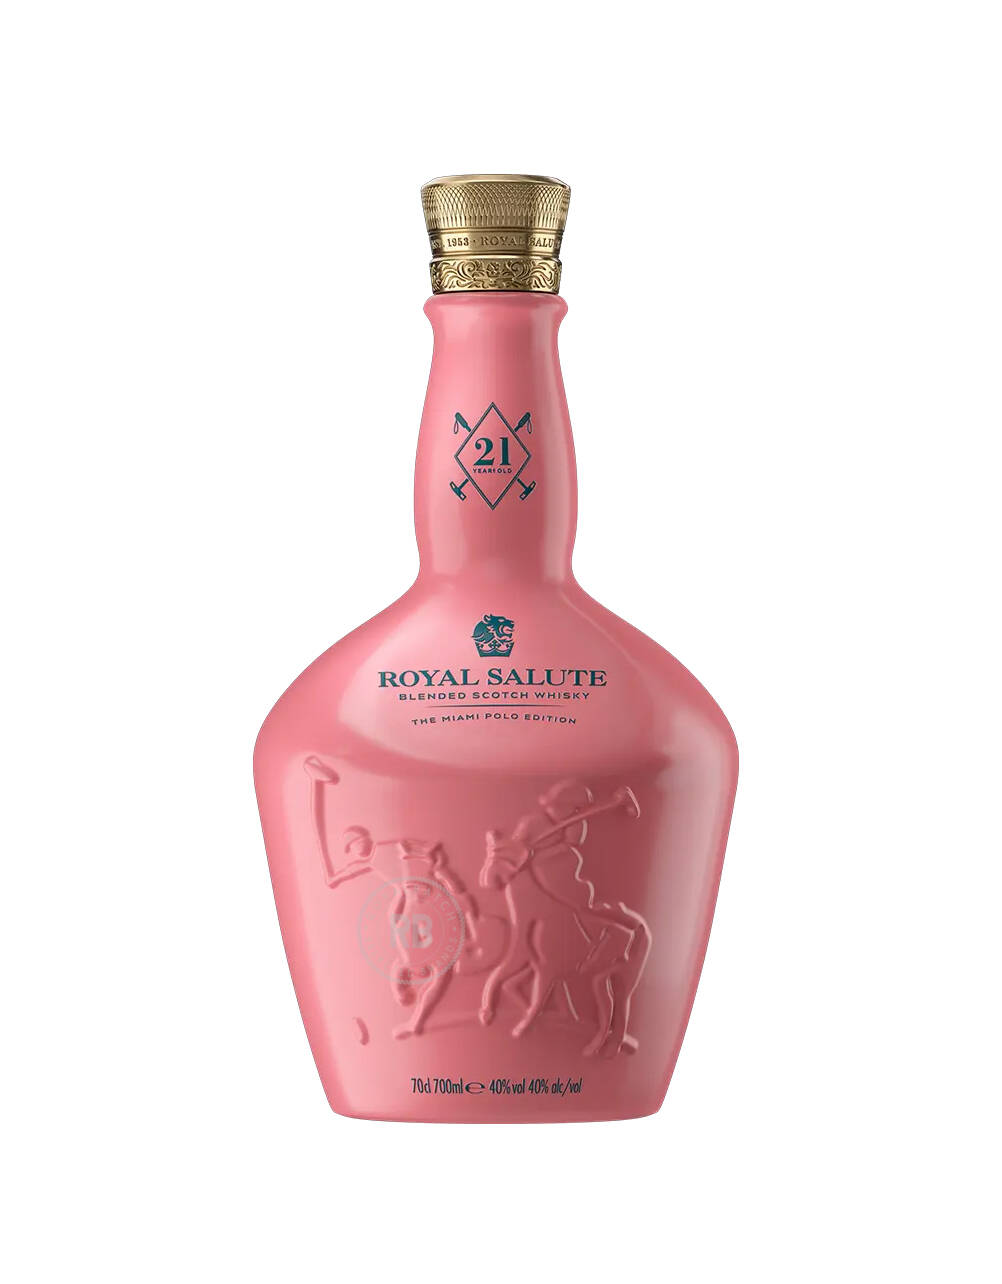 Royal Salute 21 Year Old Miami Polo Edition Scotch Whisky